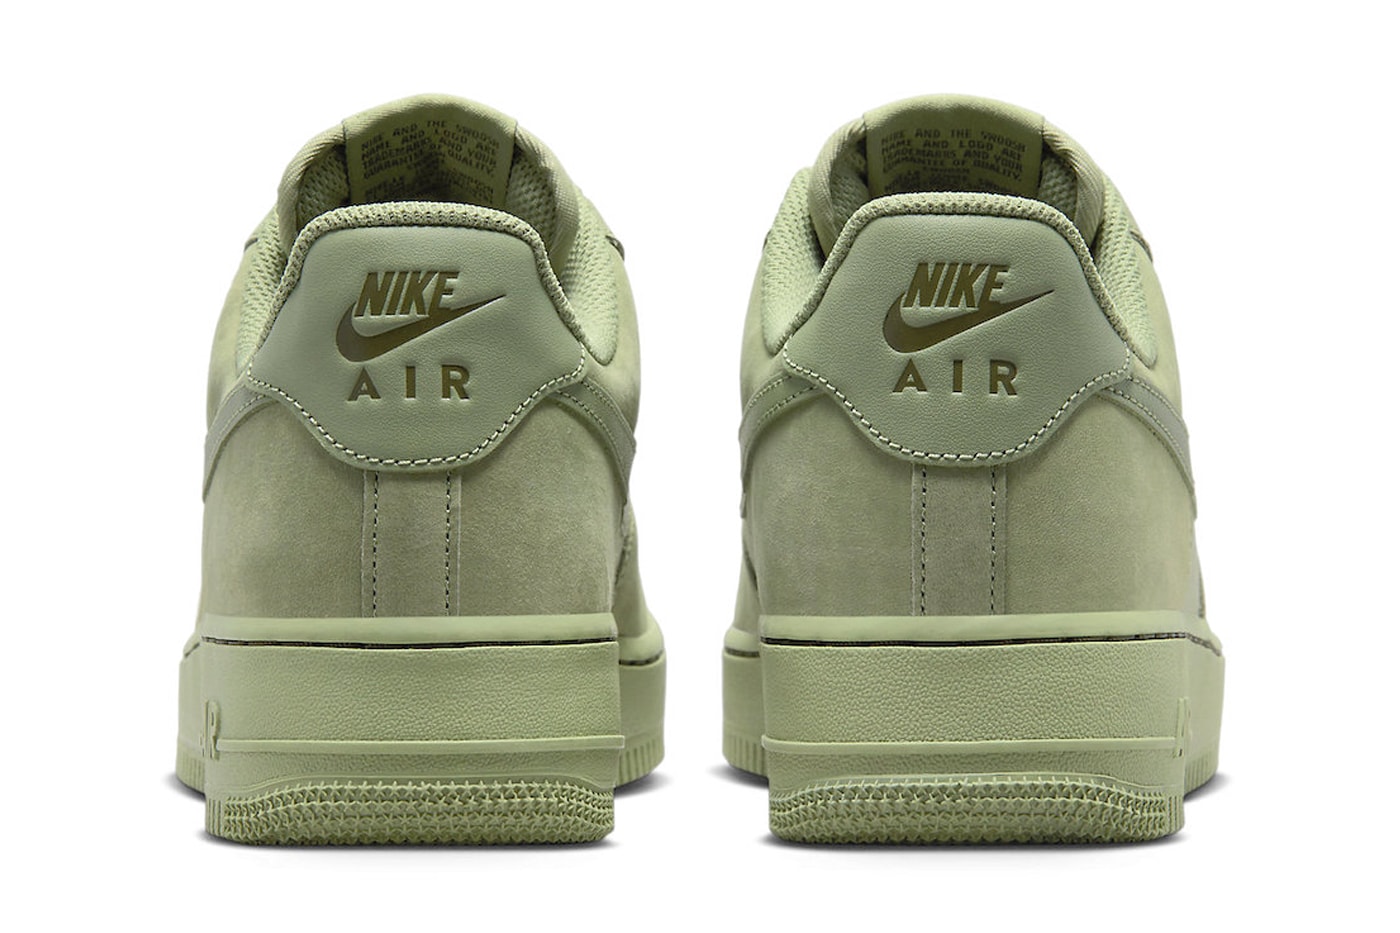 Official Look at the Nike Air Force One Low Premium "Oil Green"  FB8876-300 Oil Green/Oil Green-Cargo Khaki Release info af1 everyday sneakers suede twill